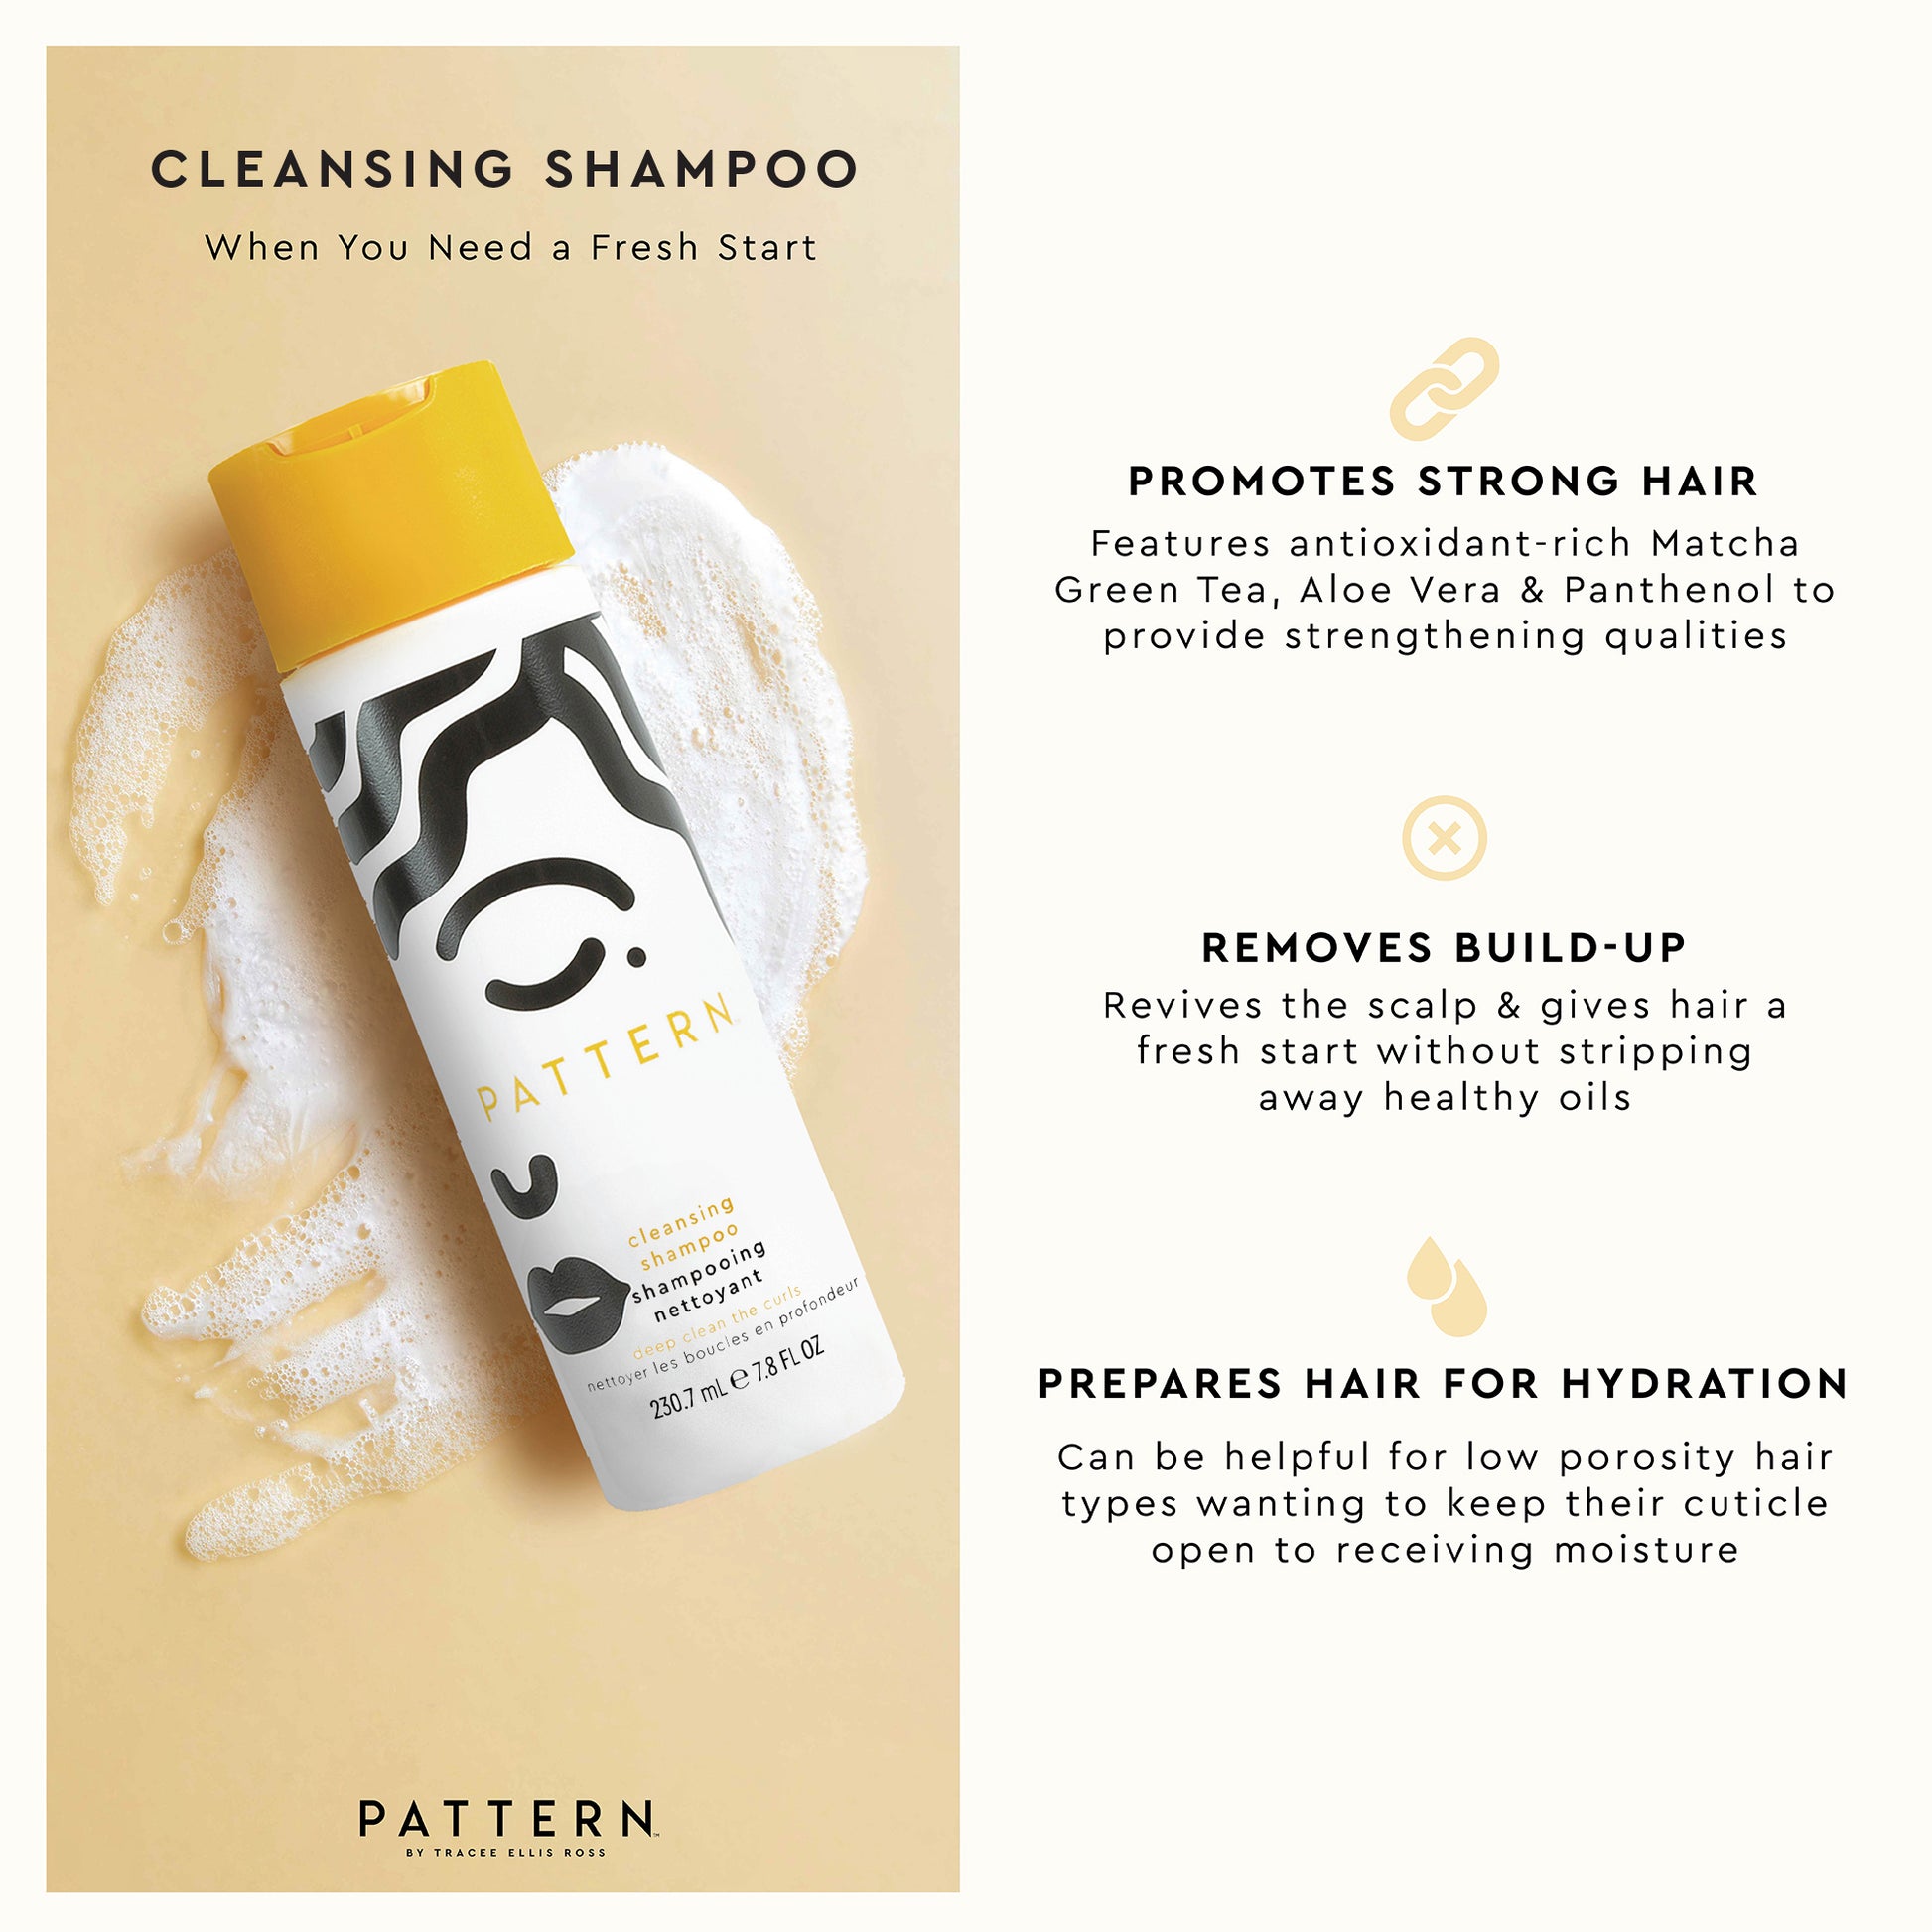 cleansing shampoo for natural hair